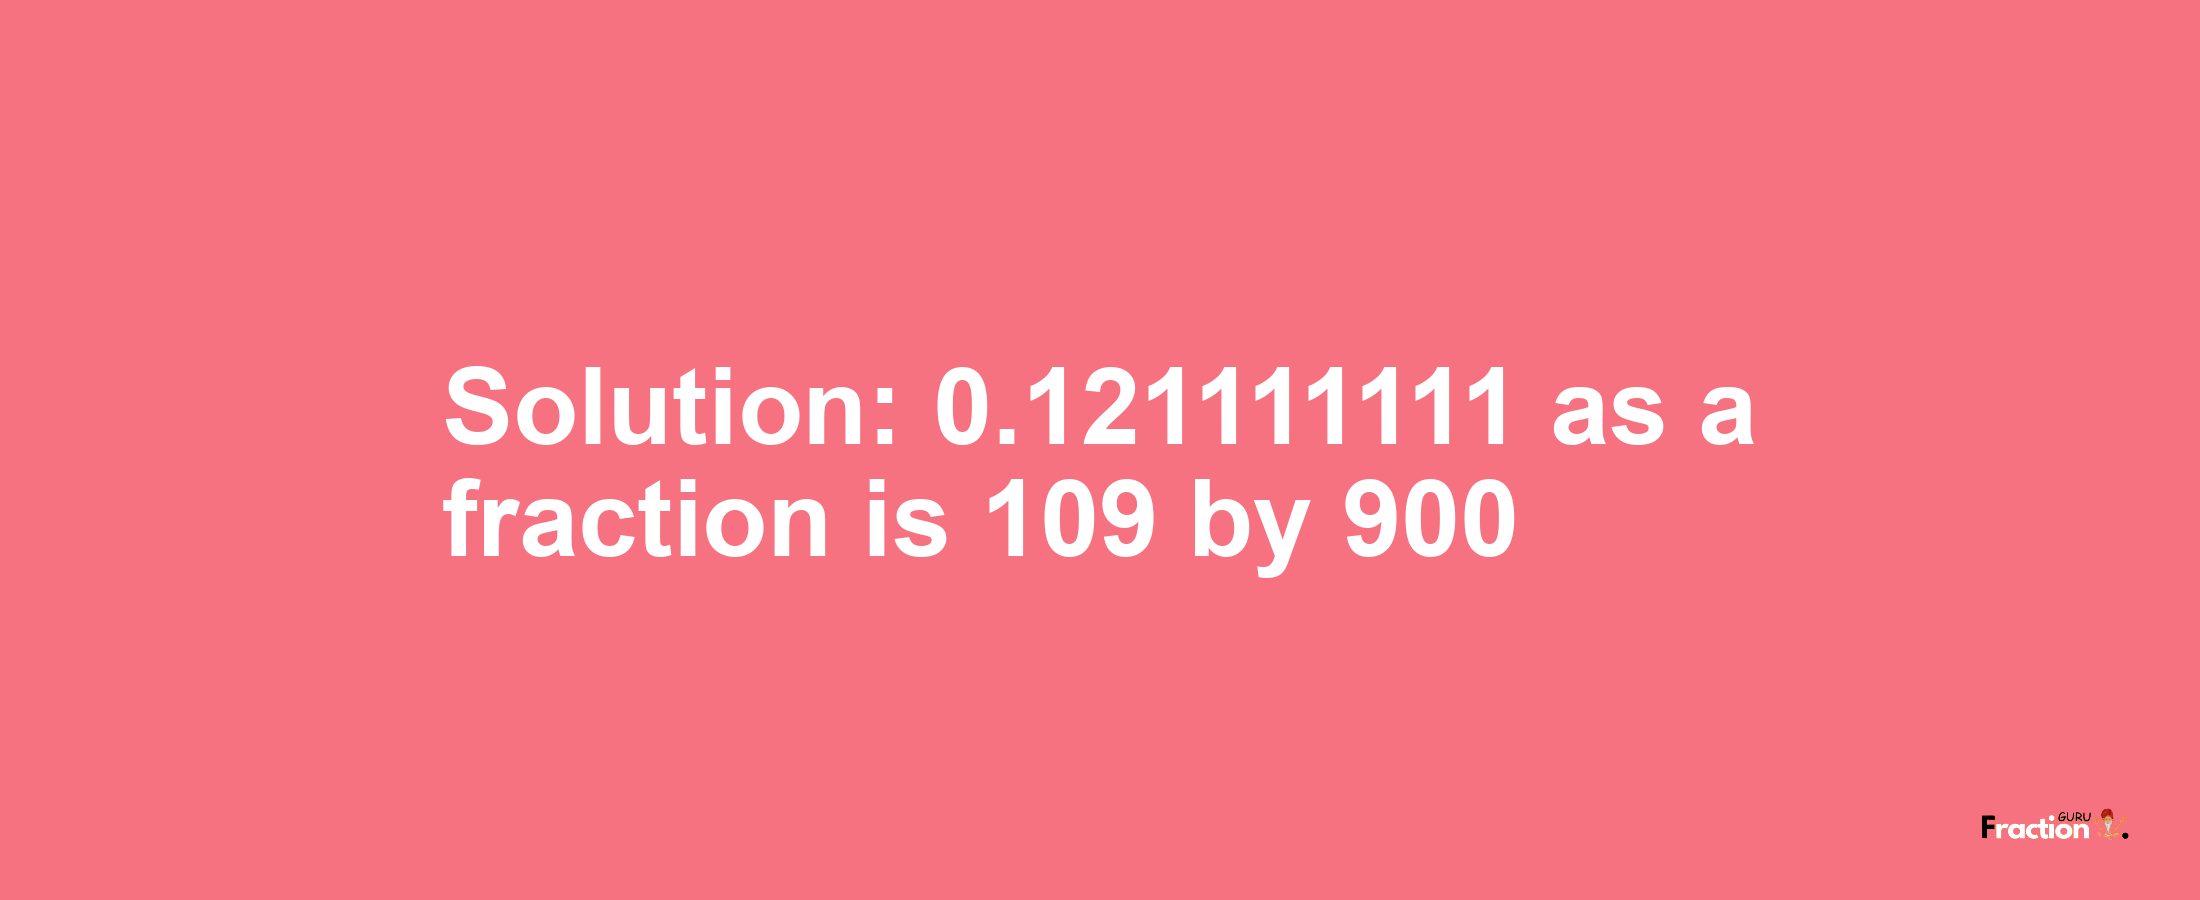 Solution:0.121111111 as a fraction is 109/900